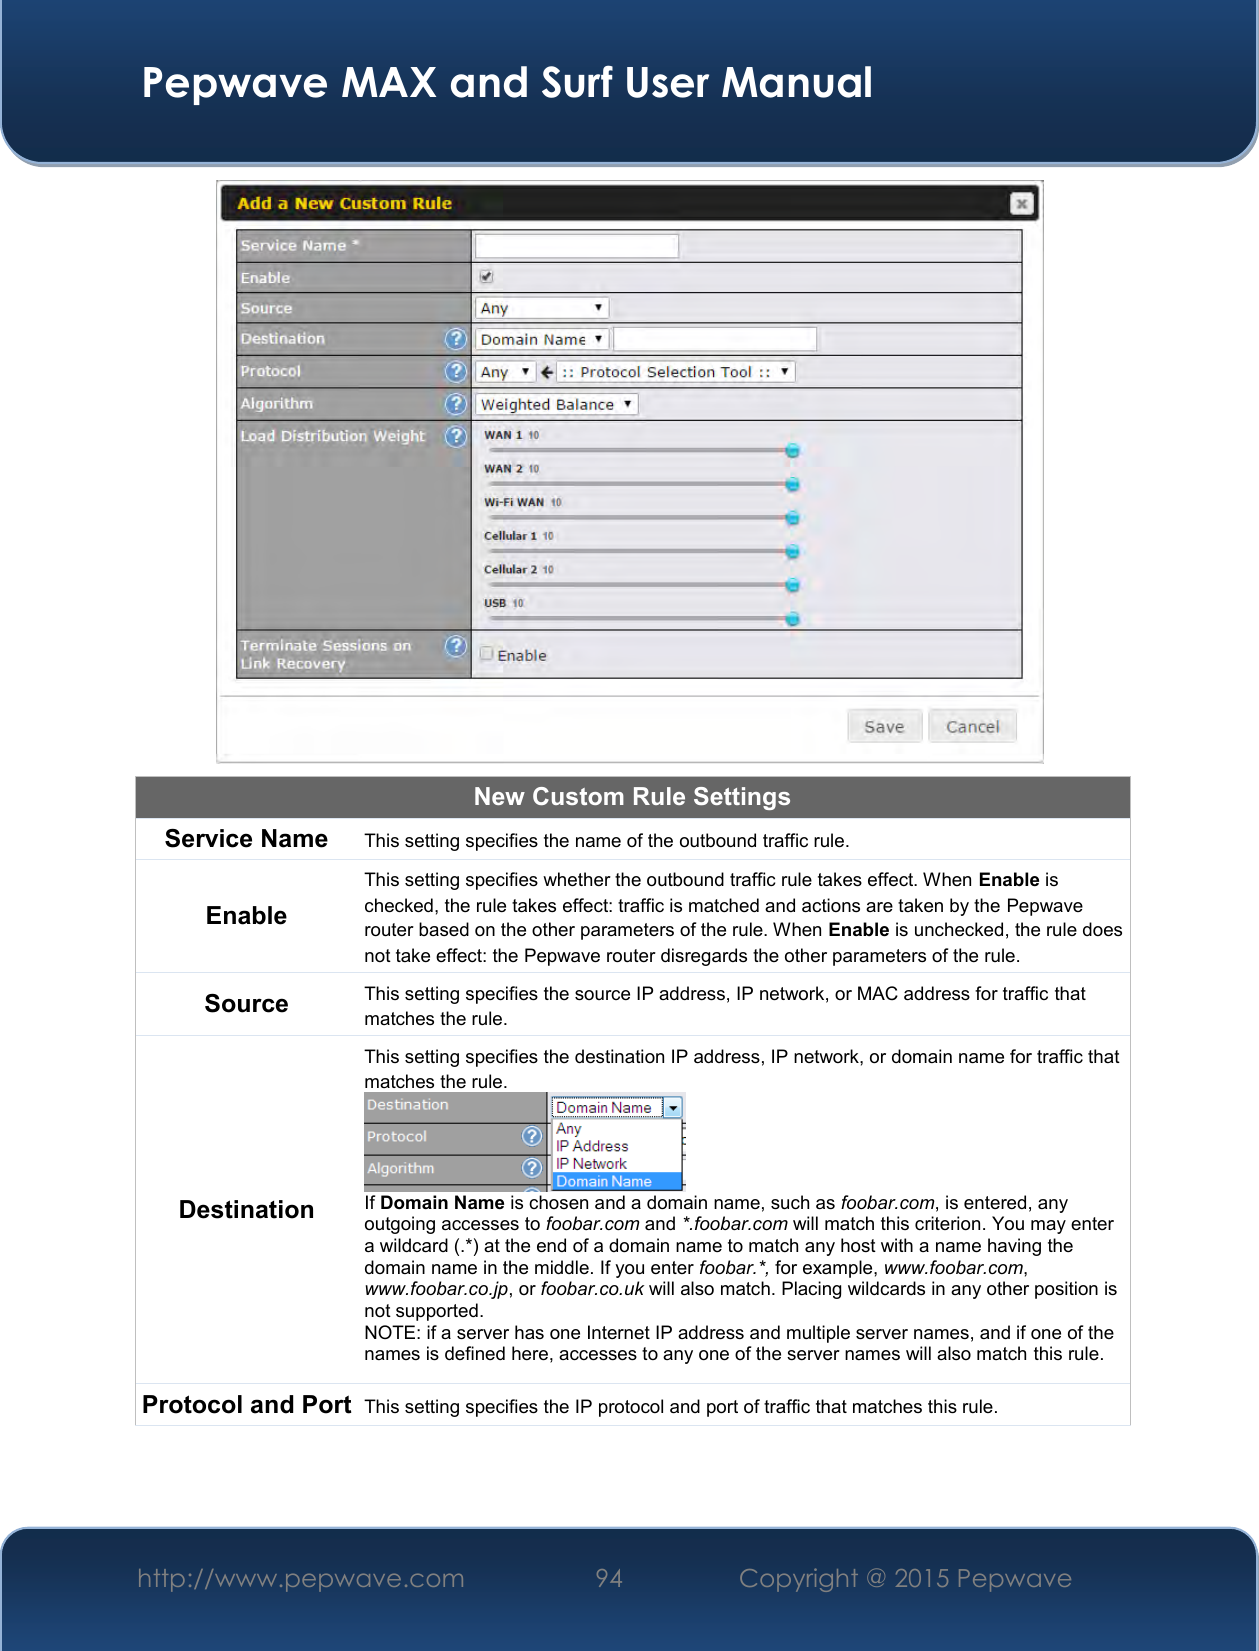  Pepwave MAX and Surf User Manual http://www.pepwave.com 94   Copyright @ 2015 Pepwave    New Custom Rule Settings Service Name This setting specifies the name of the outbound traffic rule. Enable This setting specifies whether the outbound traffic rule takes effect. When Enable is checked, the rule takes effect: traffic is matched and actions are taken by the Pepwave router based on the other parameters of the rule. When Enable is unchecked, the rule does not take effect: the Pepwave router disregards the other parameters of the rule. Source This setting specifies the source IP address, IP network, or MAC address for traffic that matches the rule. Destination This setting specifies the destination IP address, IP network, or domain name for traffic that matches the rule.  If Domain Name is chosen and a domain name, such as foobar.com, is entered, any outgoing accesses to foobar.com and *.foobar.com will match this criterion. You may enter a wildcard (.*) at the end of a domain name to match any host with a name having the domain name in the middle. If you enter foobar.*, for example, www.foobar.com, www.foobar.co.jp, or foobar.co.uk will also match. Placing wildcards in any other position is not supported. NOTE: if a server has one Internet IP address and multiple server names, and if one of the names is defined here, accesses to any one of the server names will also match this rule. Protocol and Port This setting specifies the IP protocol and port of traffic that matches this rule. 